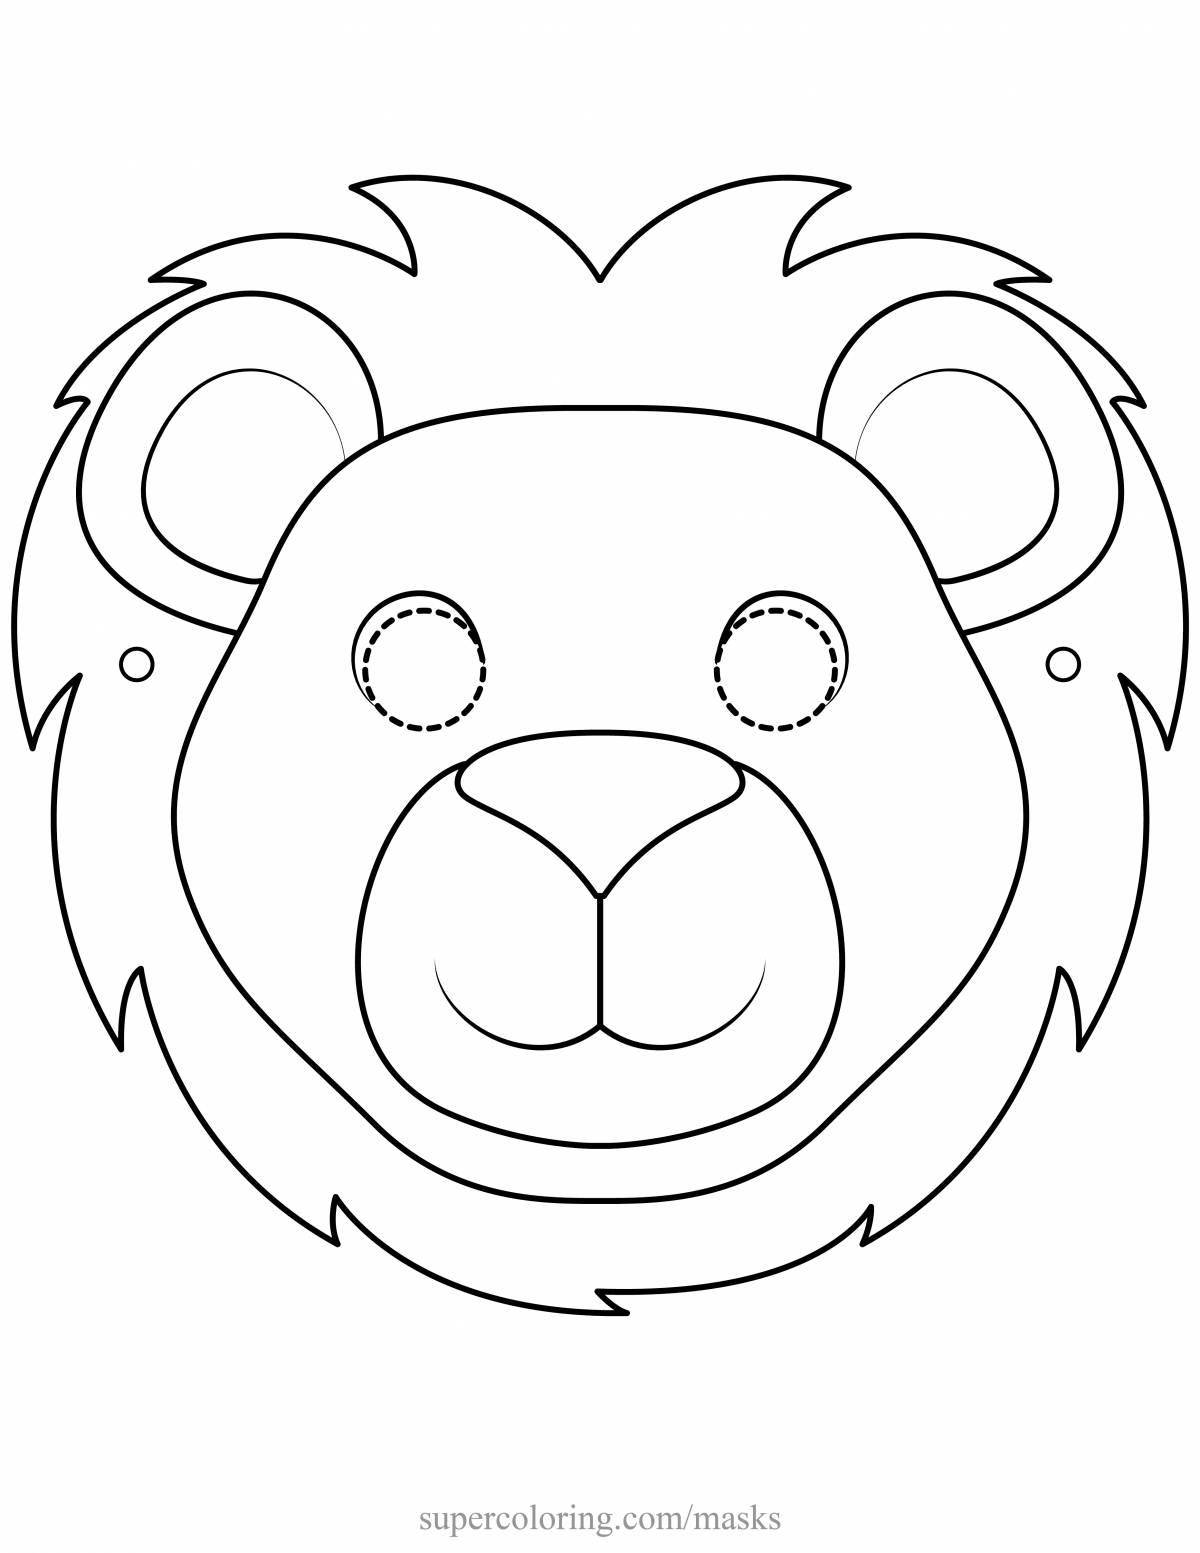 Colorful animal masks coloring pages for kids